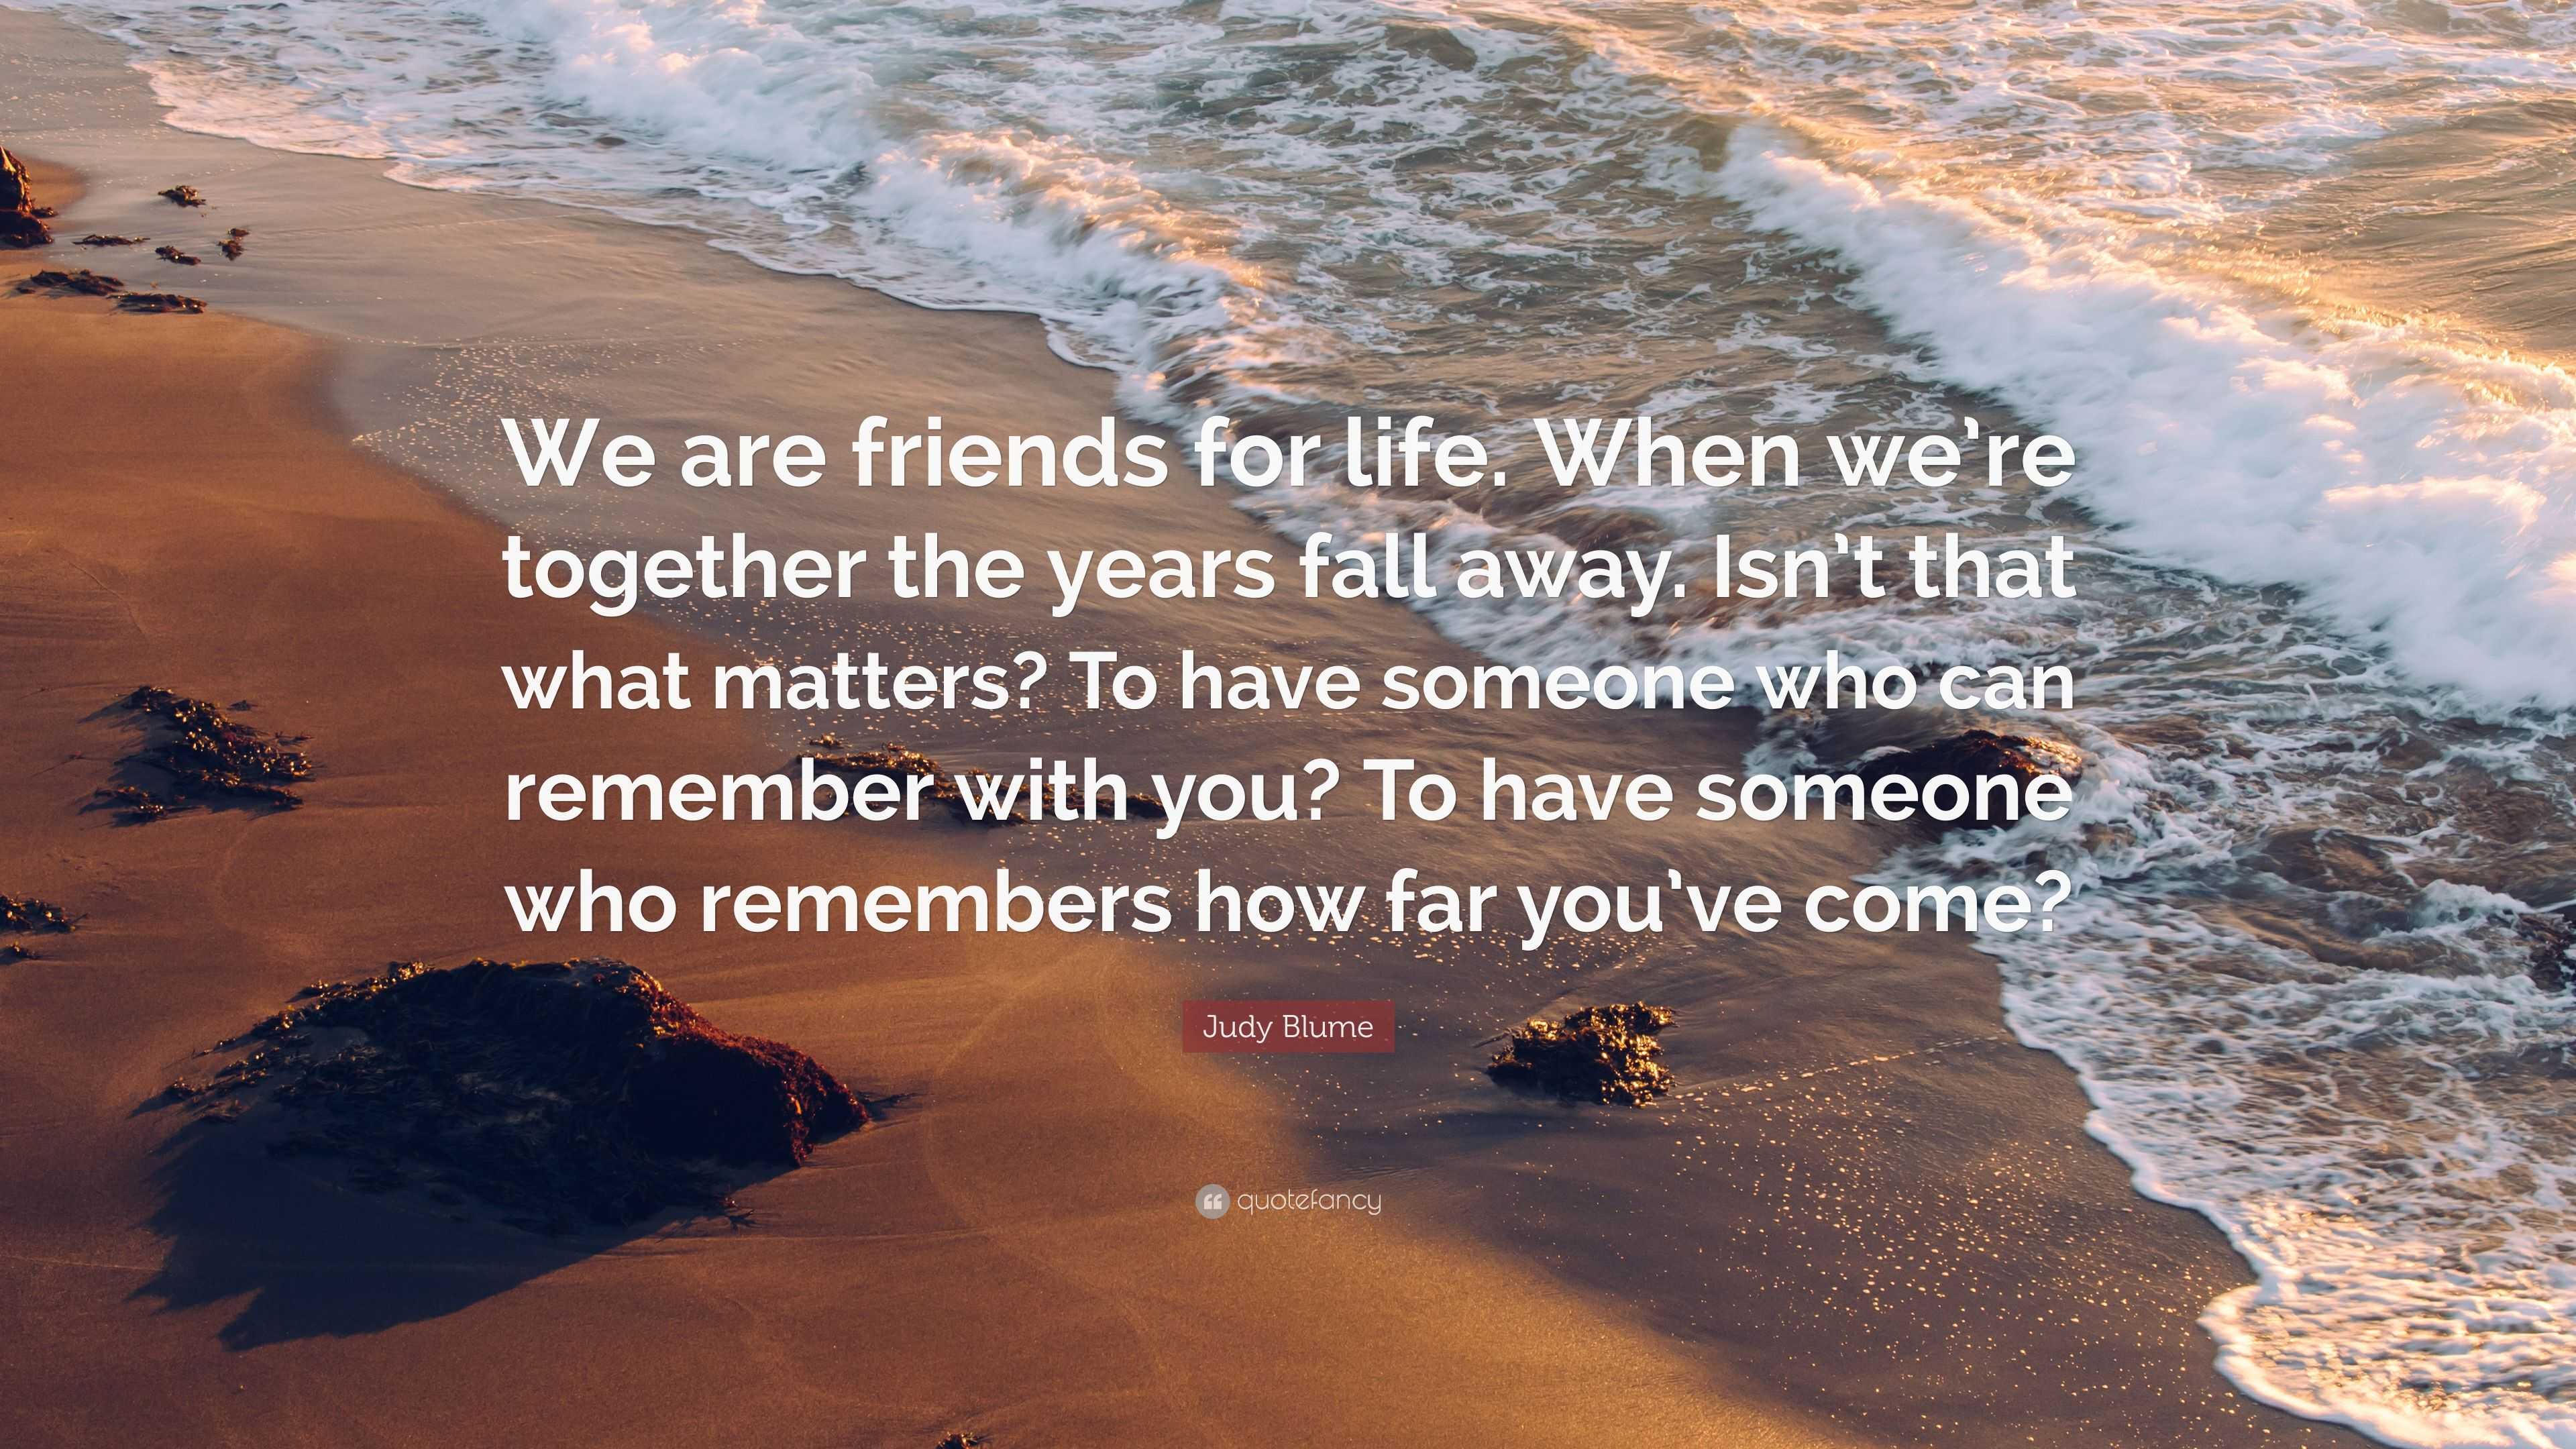 Judy Blume Quote: “We are friends for life. When we’re together the ...